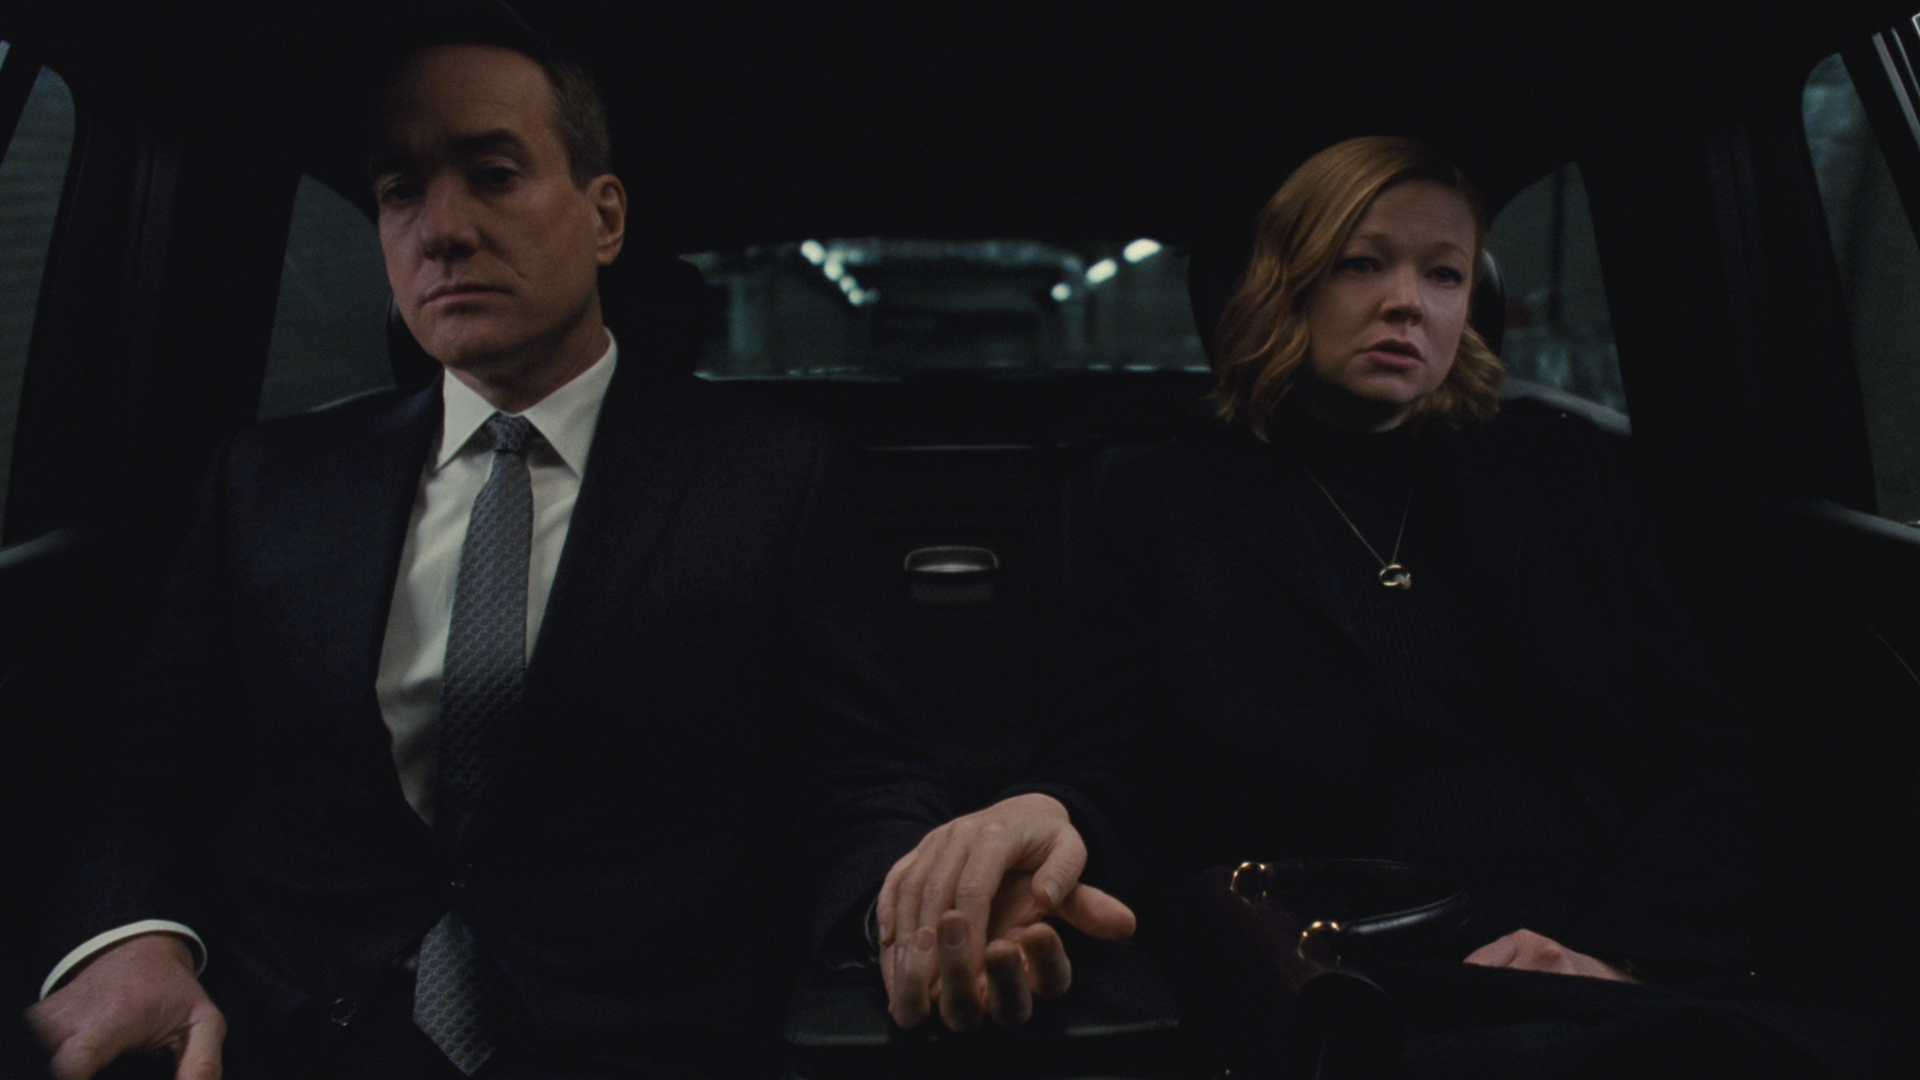 Sarah Snook and Matthew Macfadyen in their final scene in HBO's "Succession" series finale.